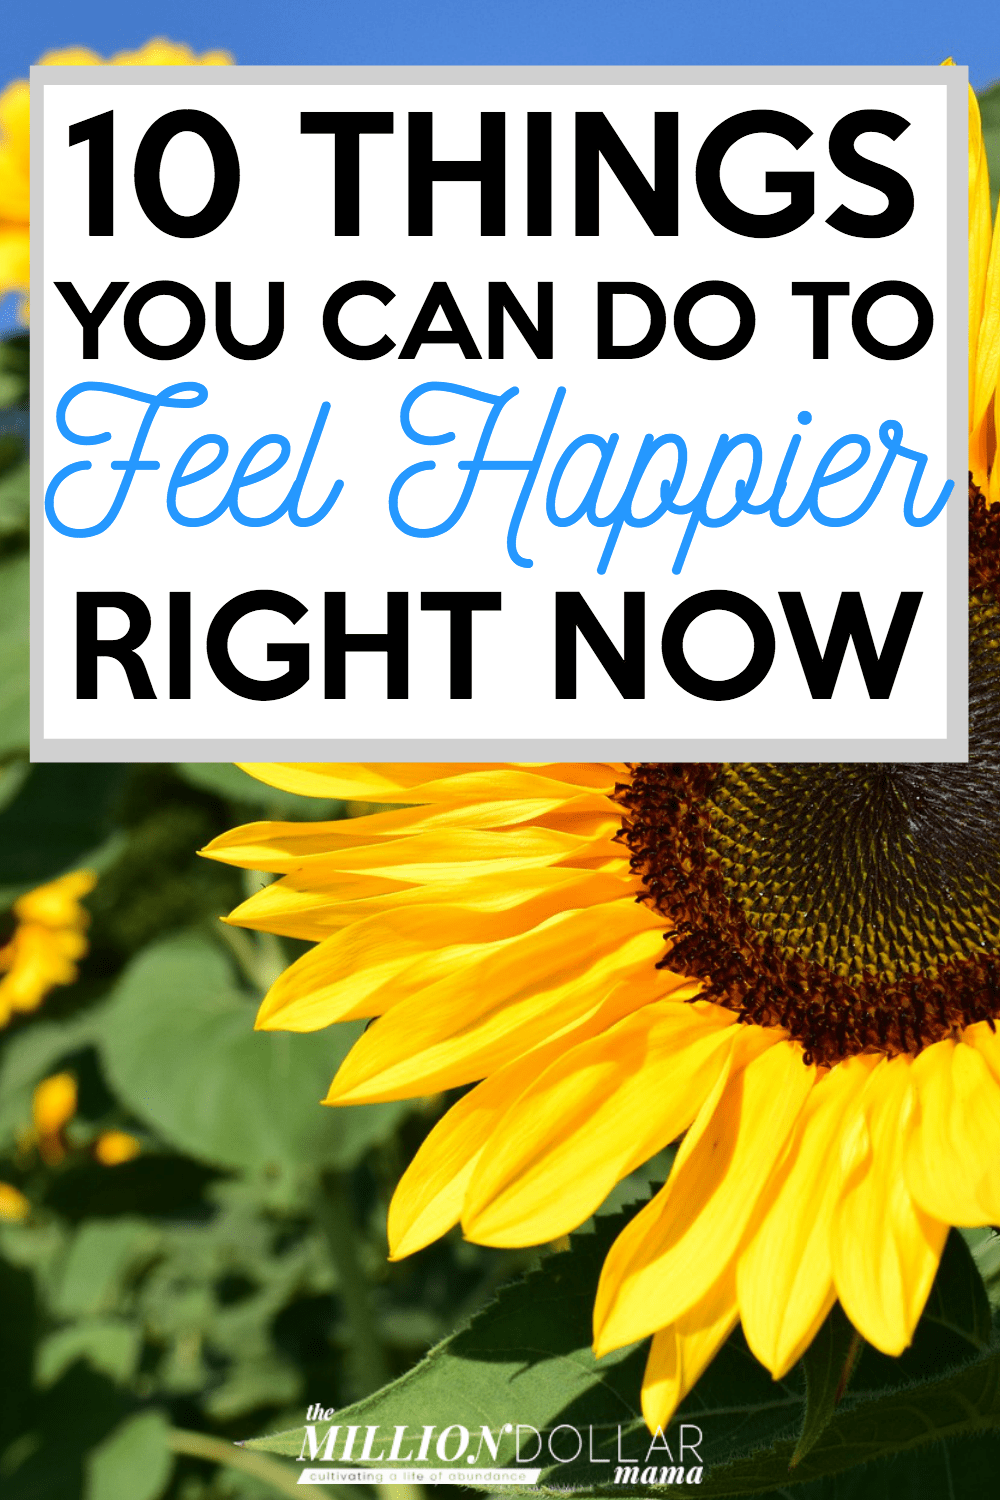 How to feel happy when you're down in the dumps! Click through to find out 10 things you can do to feel happier right now.